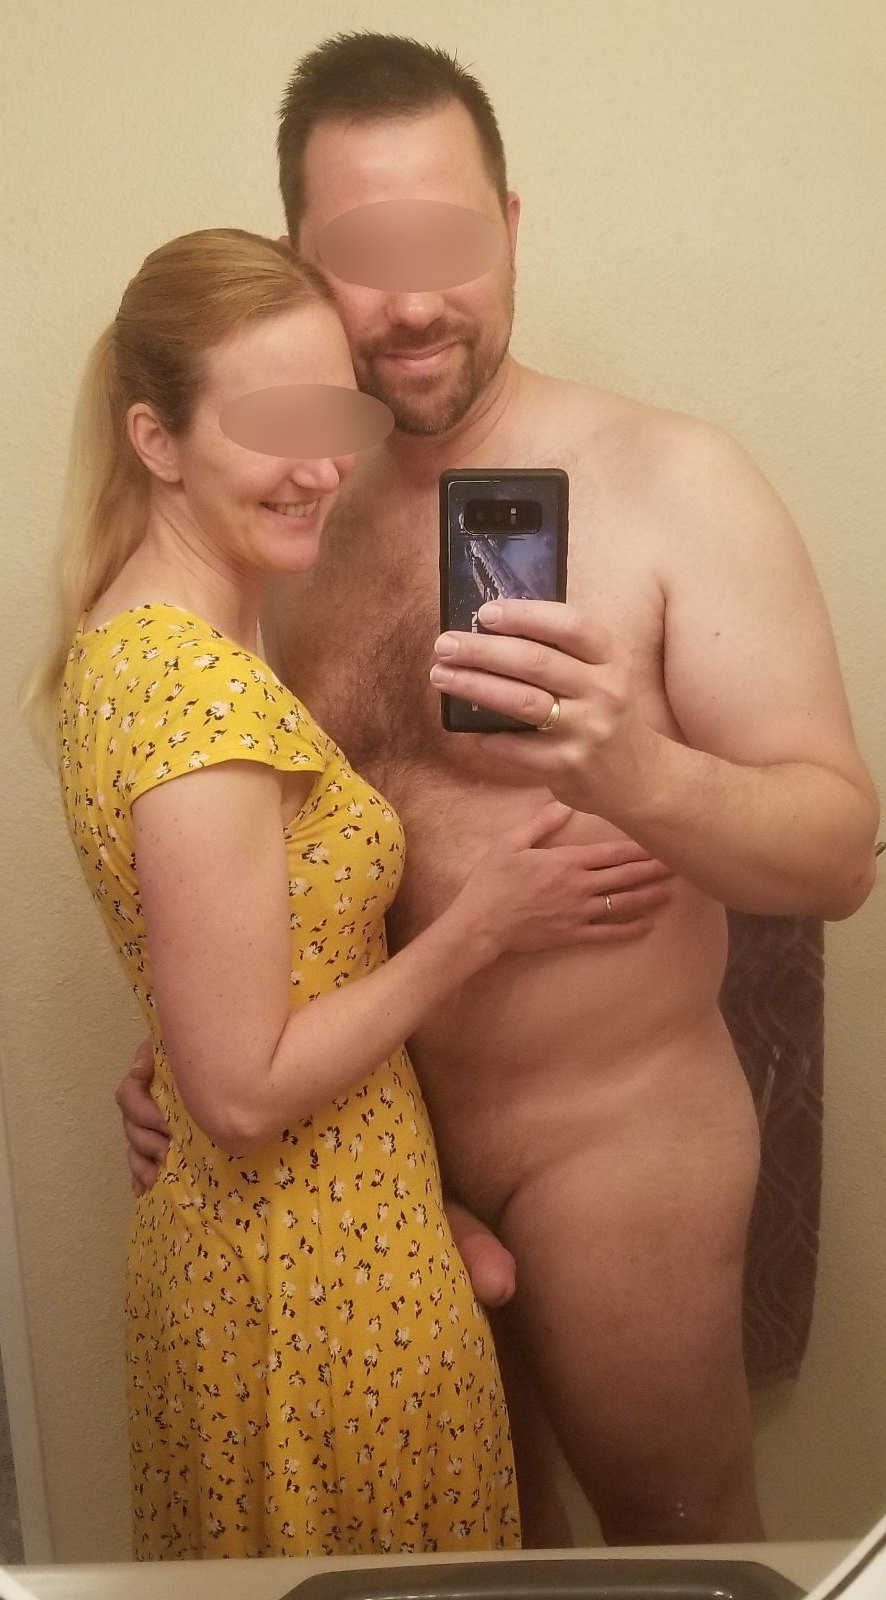 amateur porn, CFNM photo, wife with a naked image